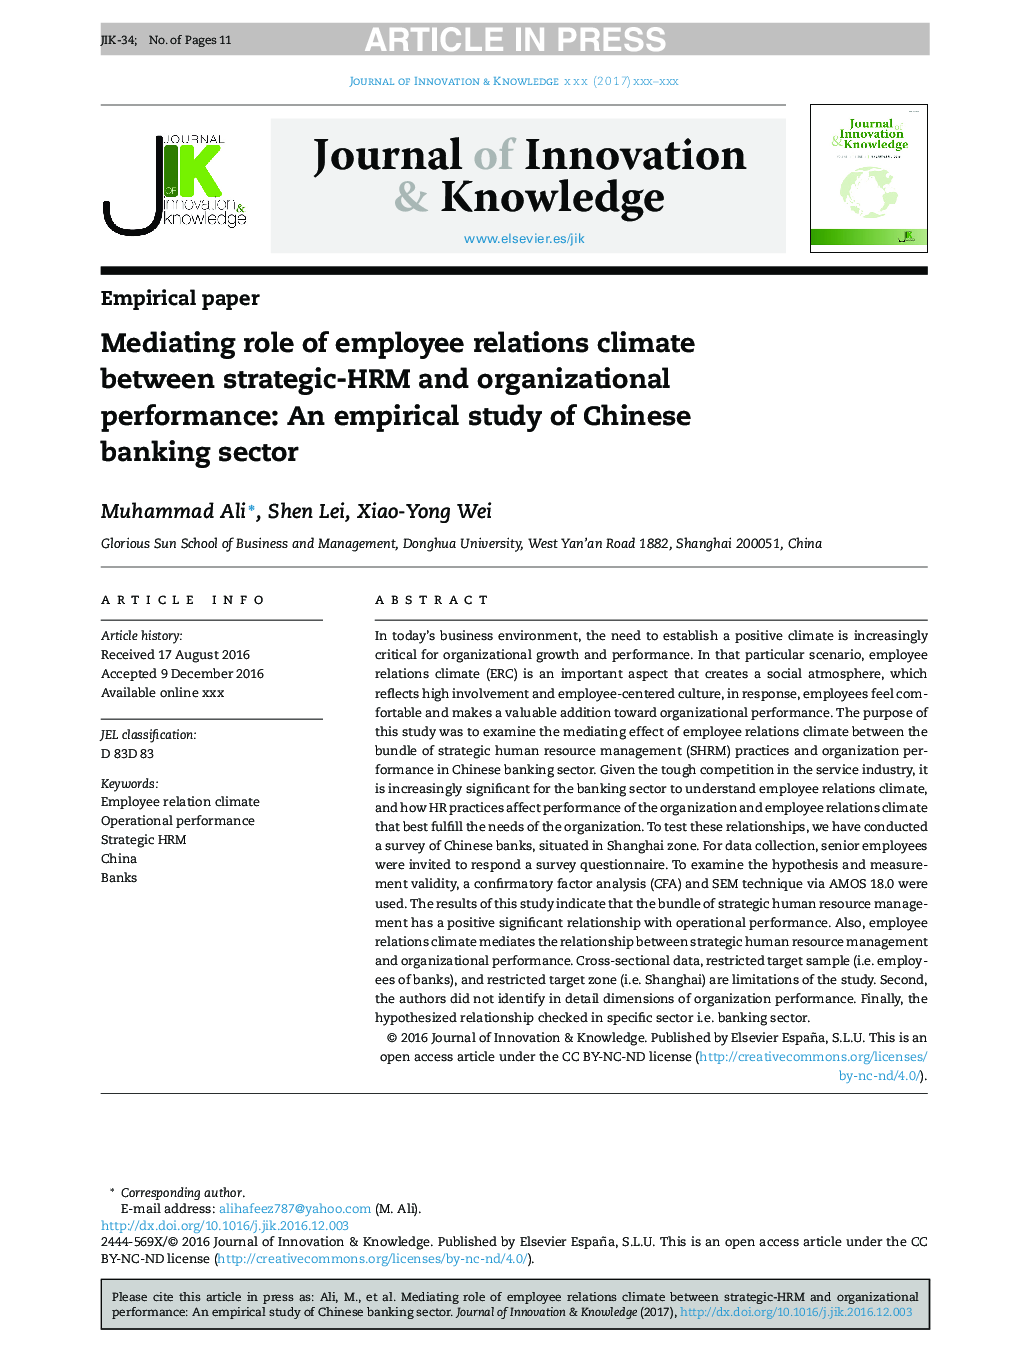 The mediating role of the employee relations climate in the relationship between strategic HRM and organizational performance in Chinese banks